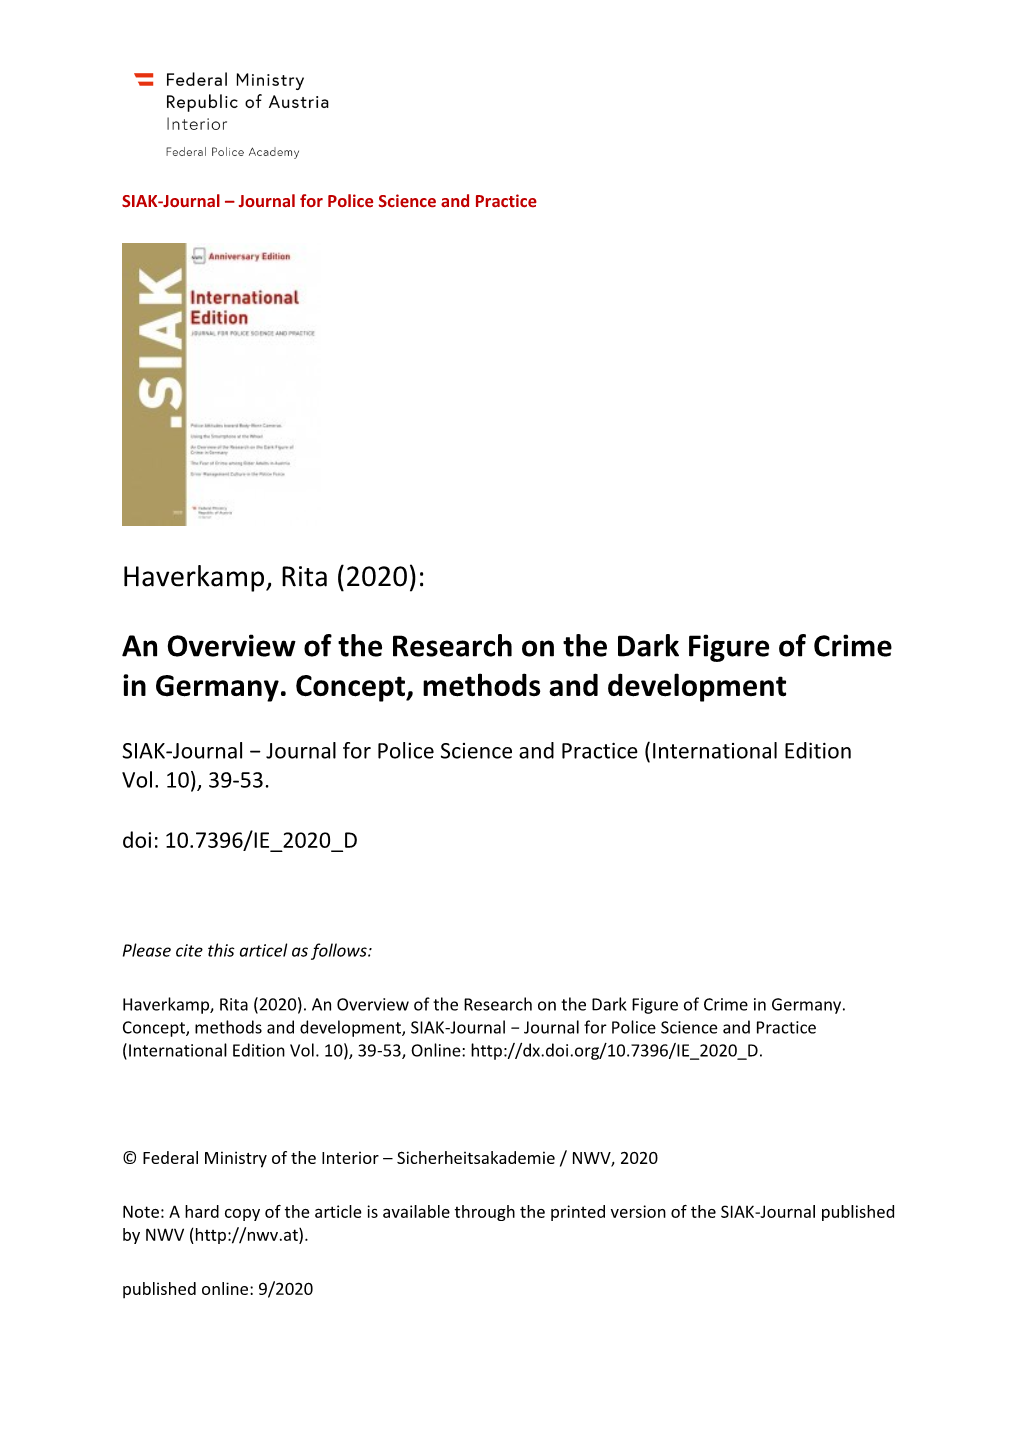 An Overview of the Research on the Dark Figure of Crime in Germany